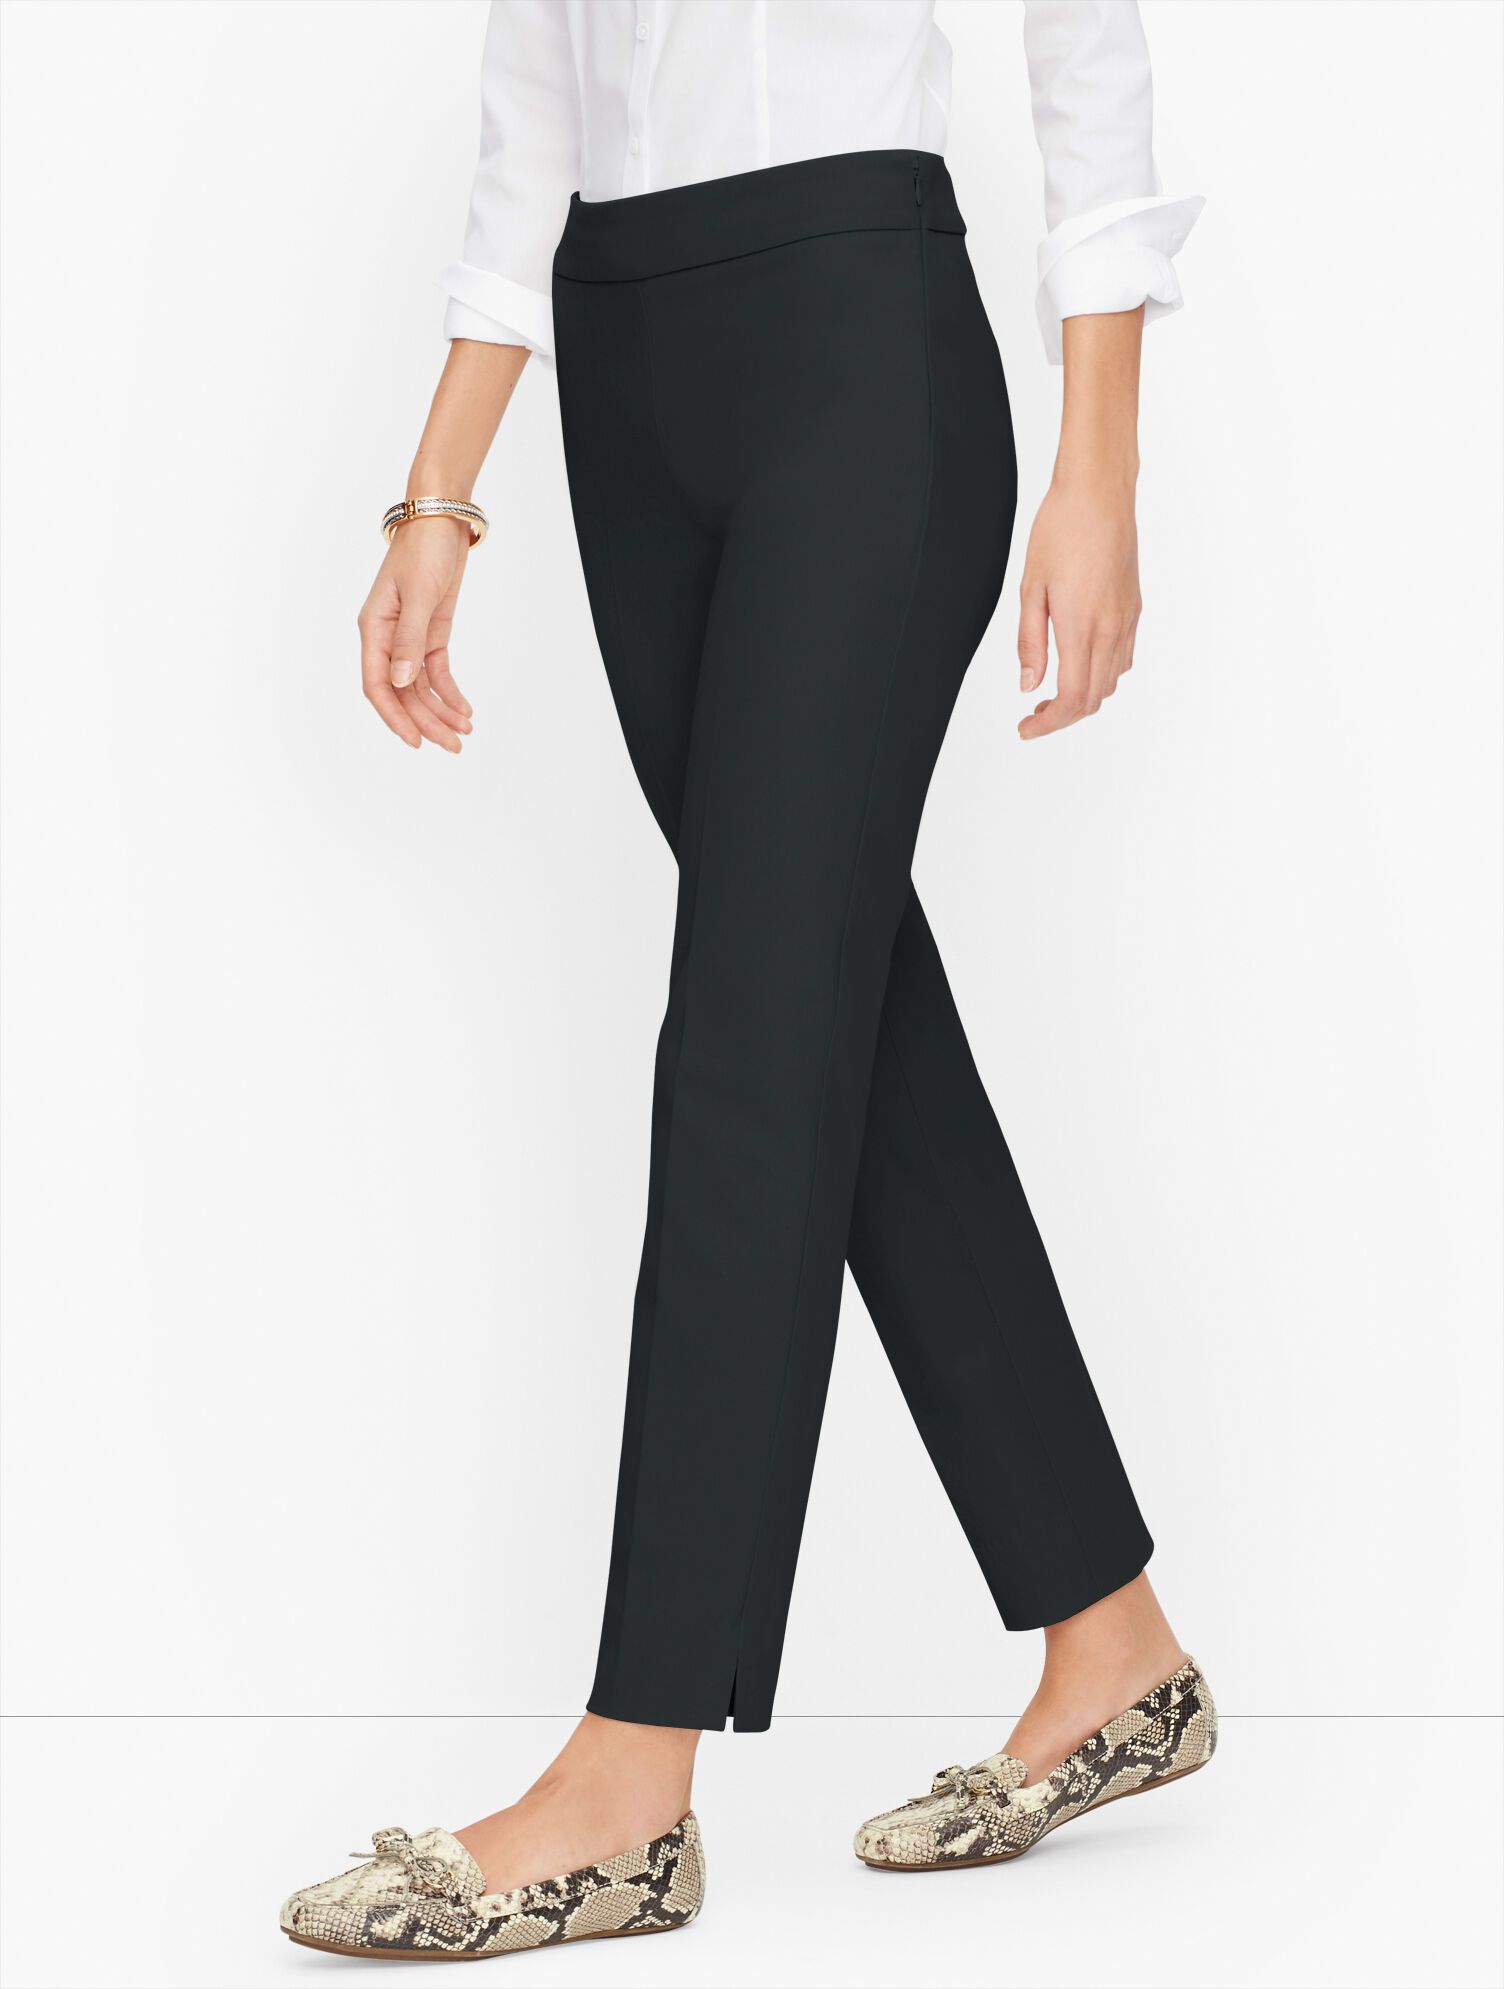 Talbots Chatham Ankle Pants - Solid | Talbots